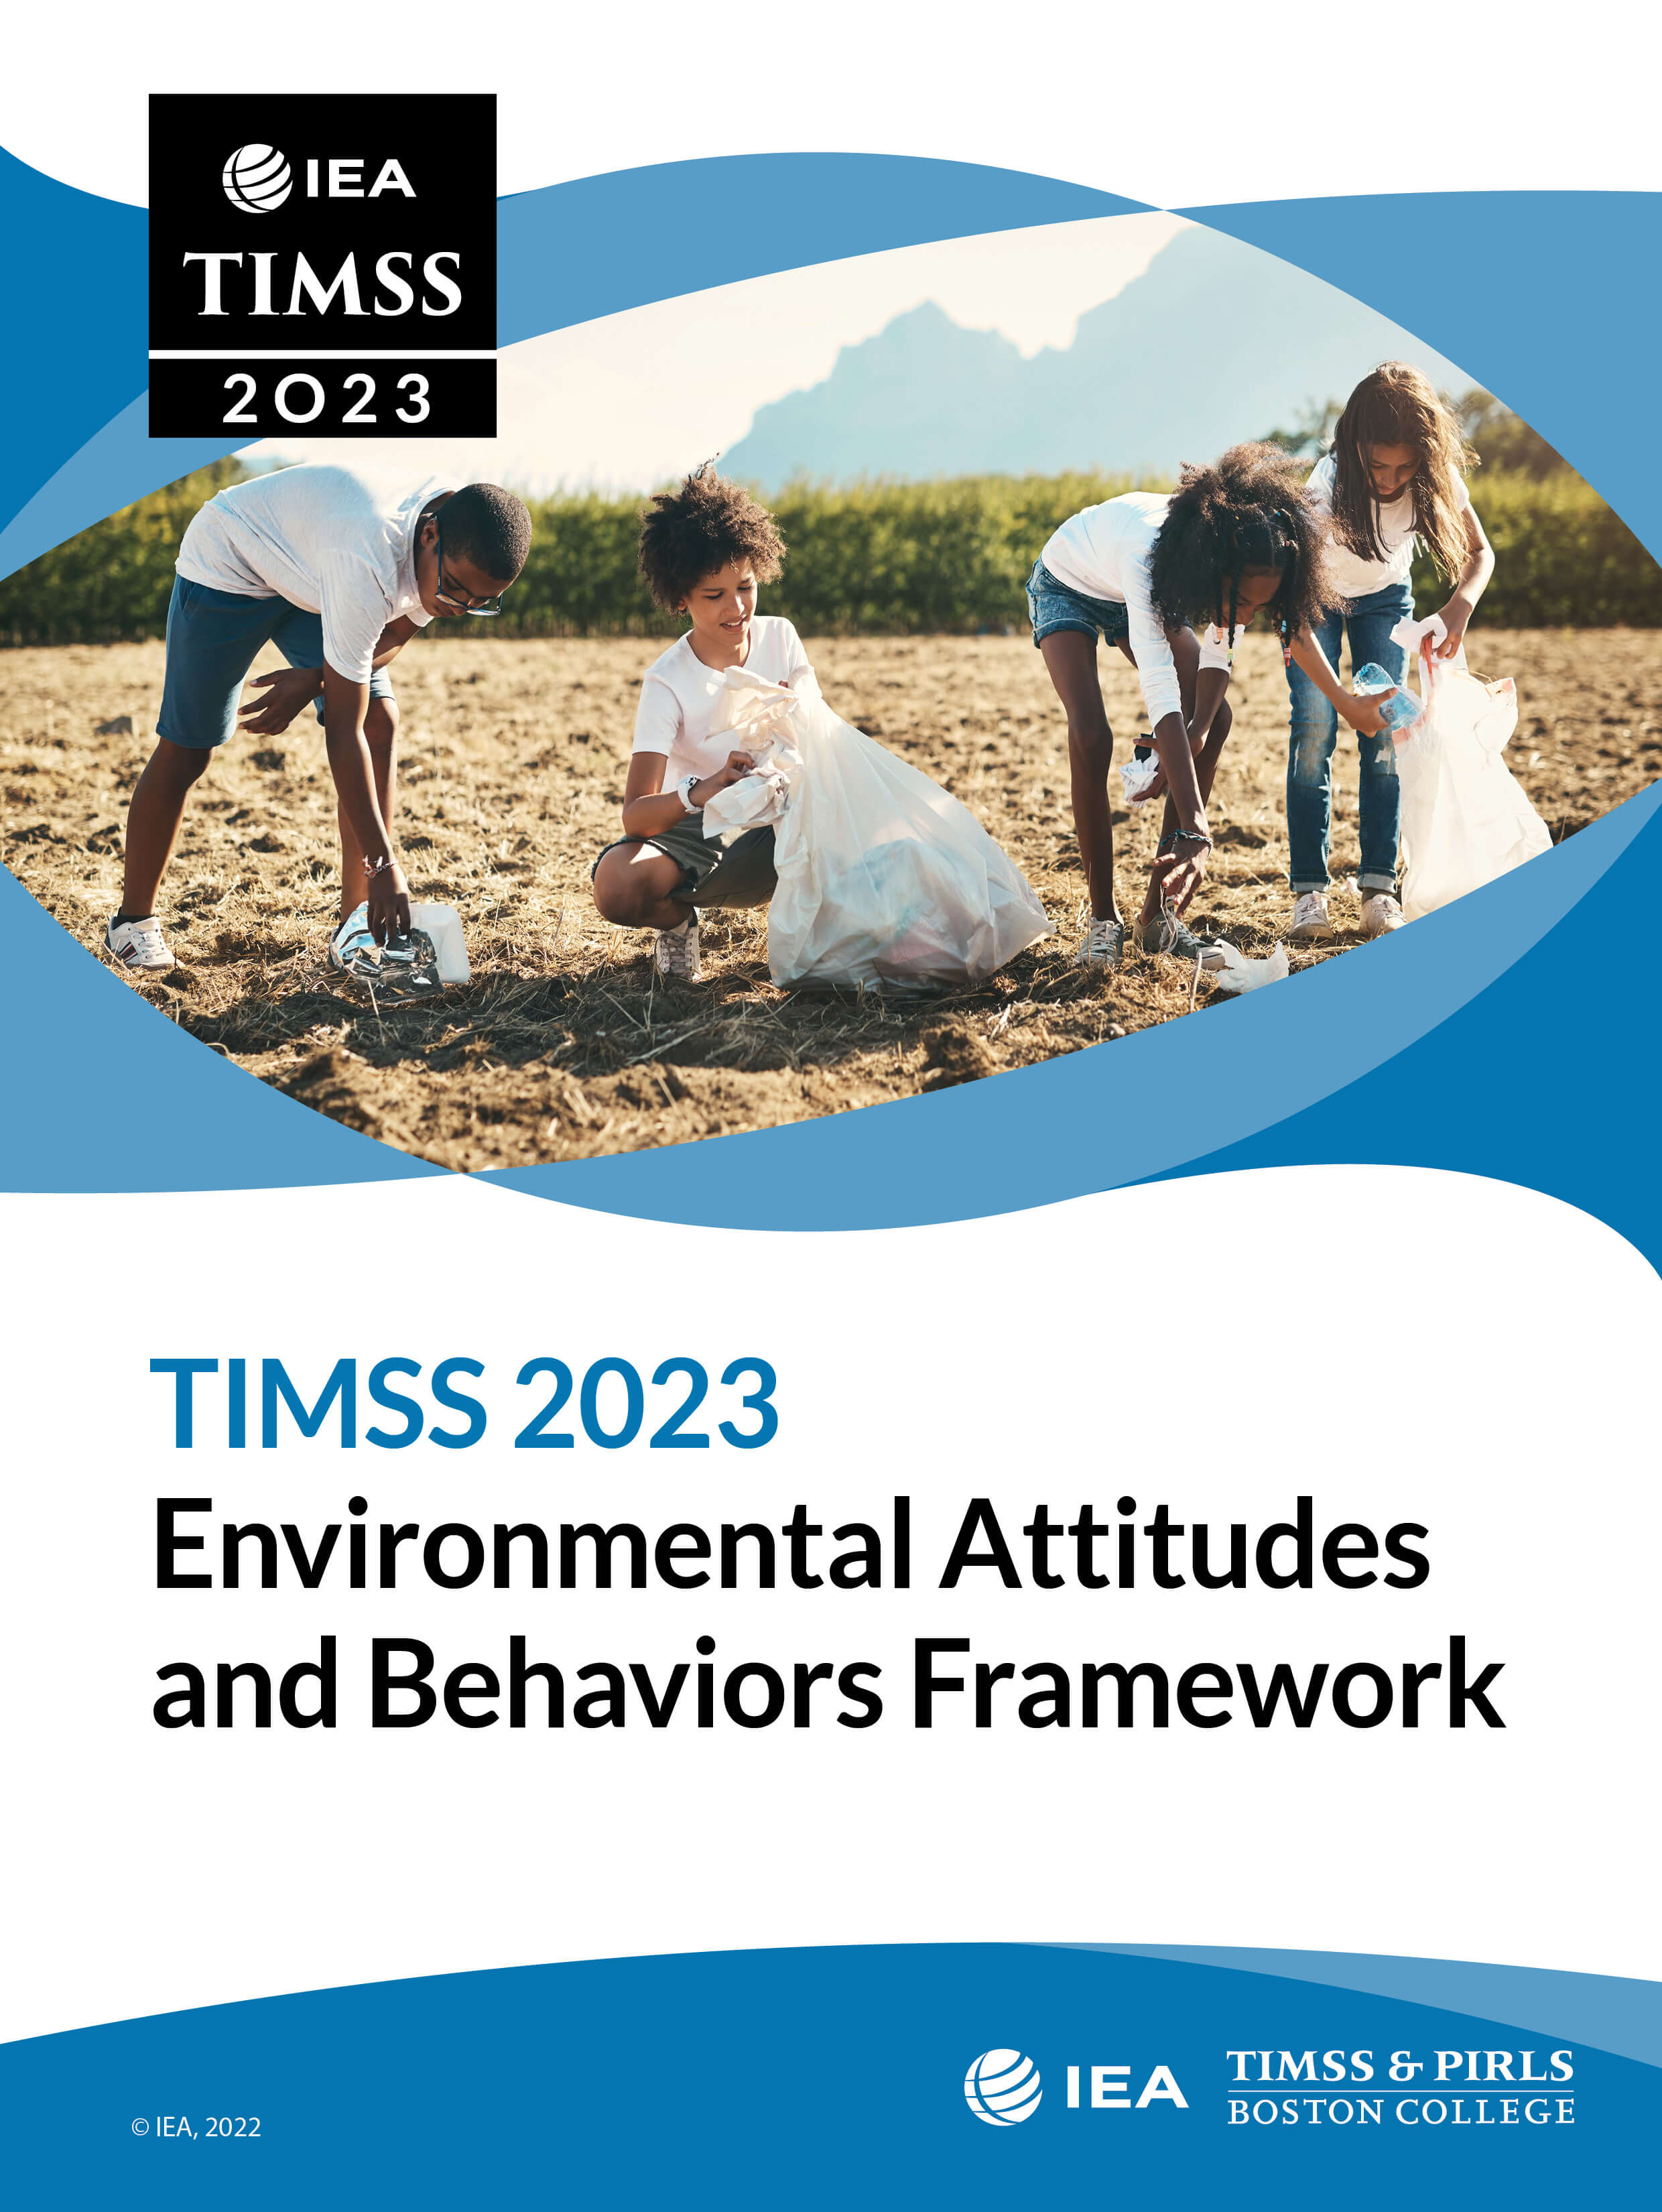 Cover art for the TIMSS 2023 Environmental Attitudes and Behaviors Framework.